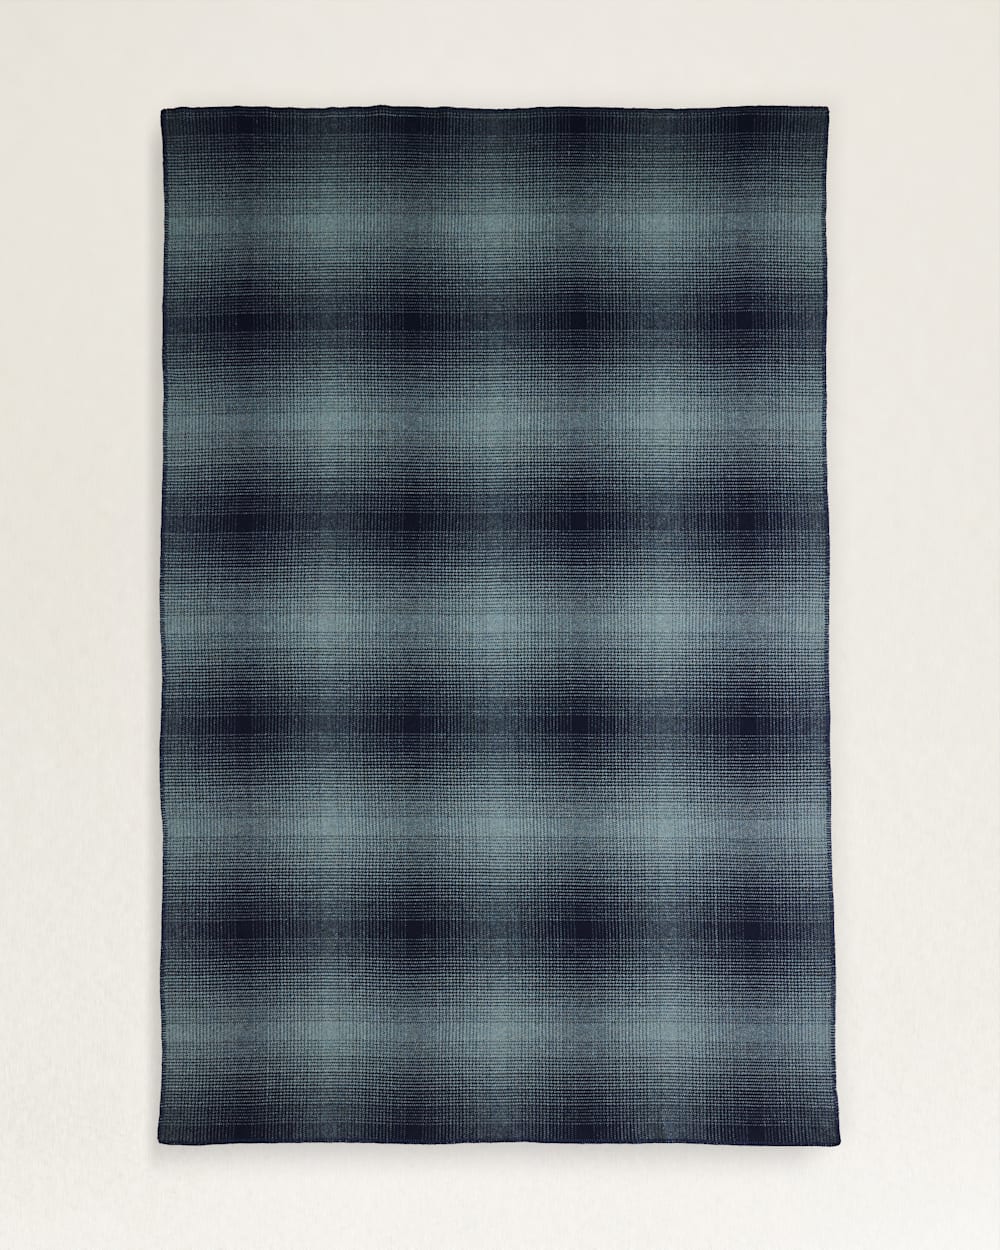 ALTERNATE VIEW OF ECO-WISE WOOL OMBRE BLANKET IN SHALE/NAVY image number 3